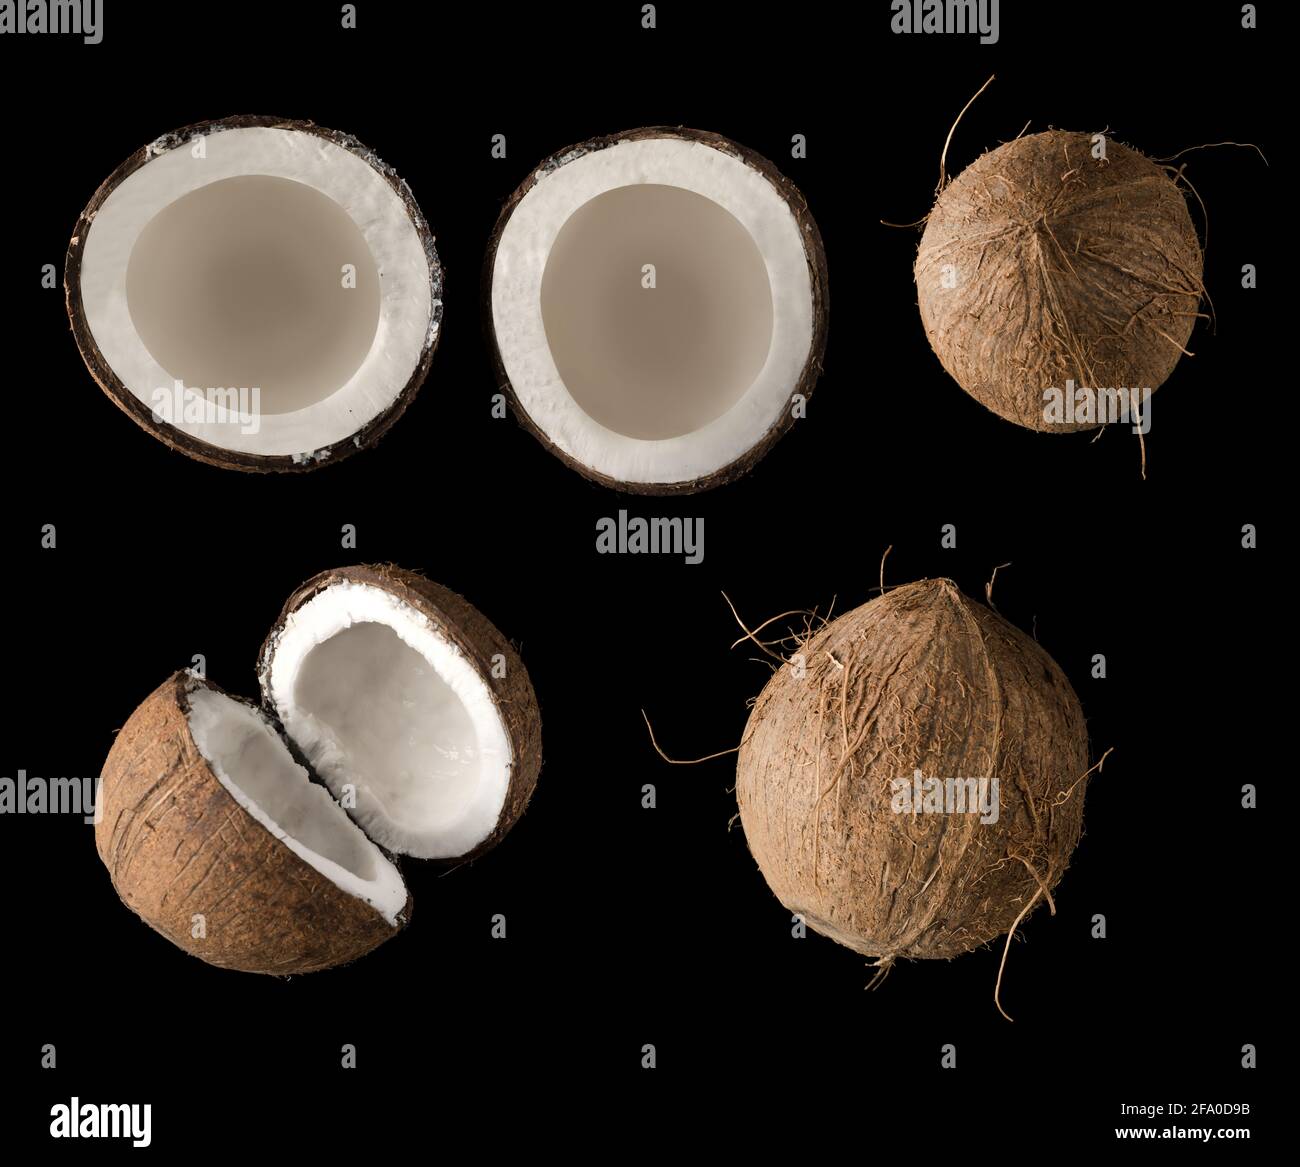 Coconut divided into two equal parts, view from the top, on a black background, collage Stock Photo